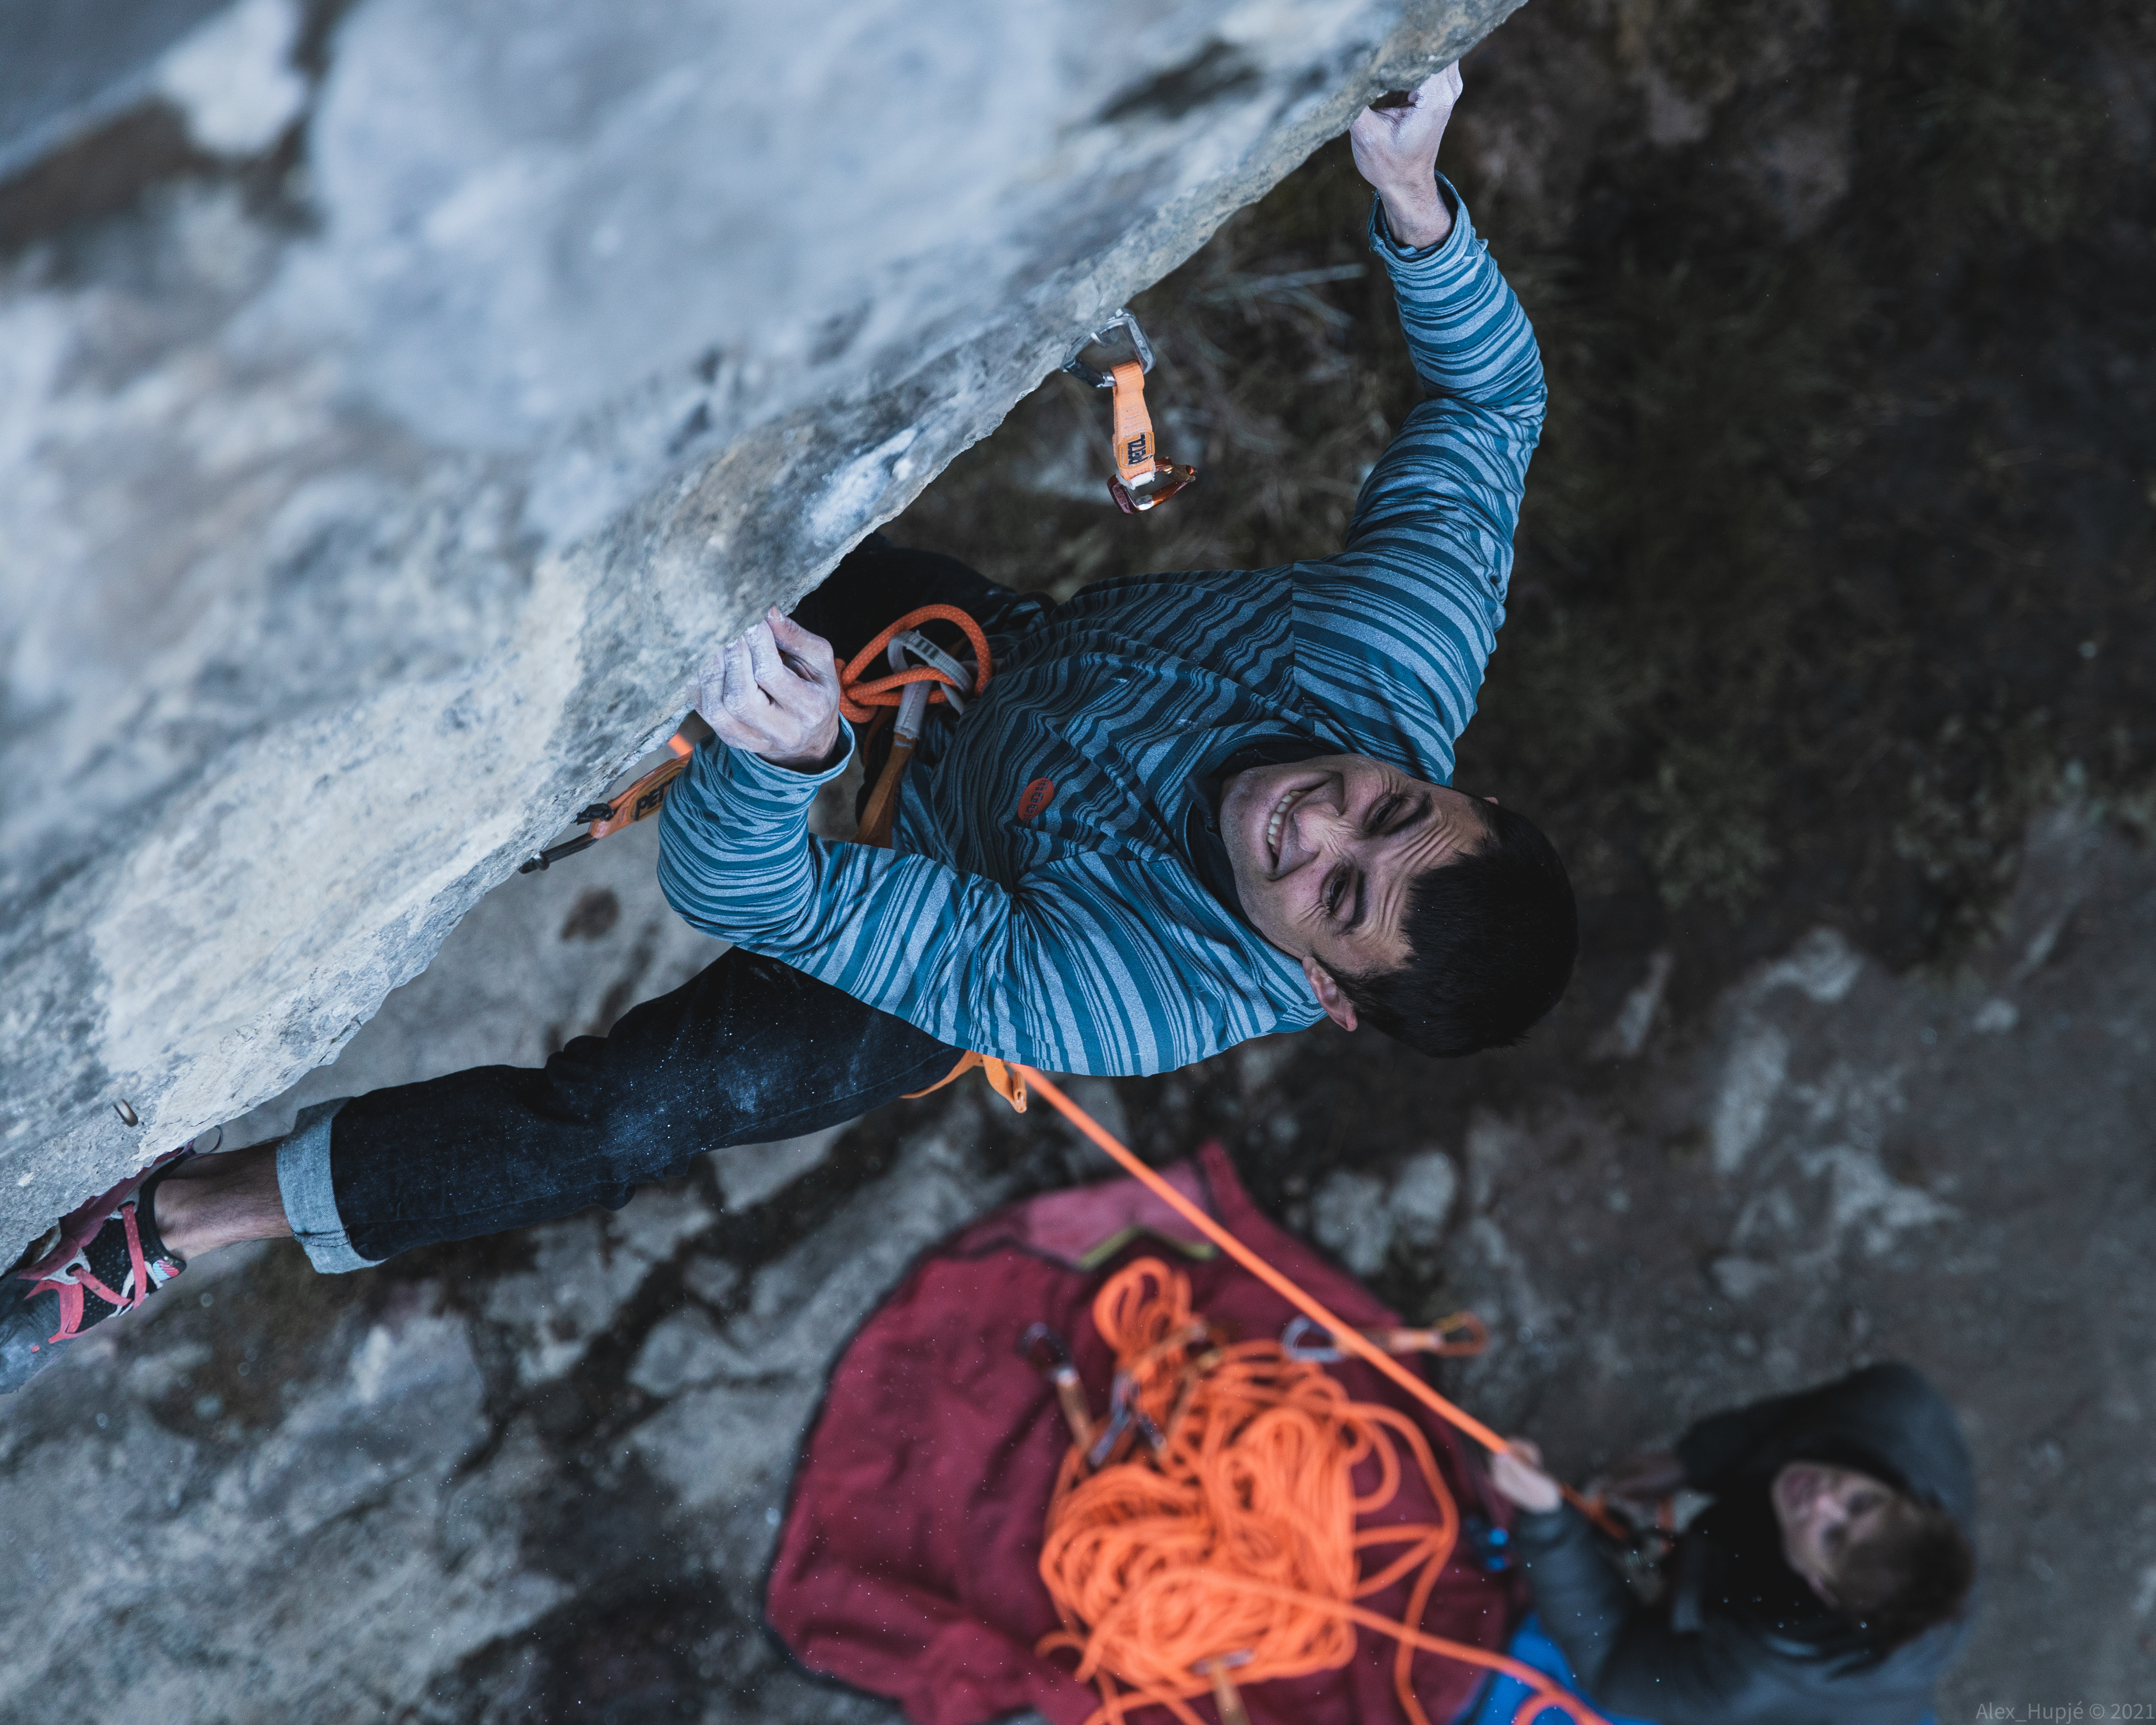 Persian Dawn 8C+ First Ascent by Buster Martin